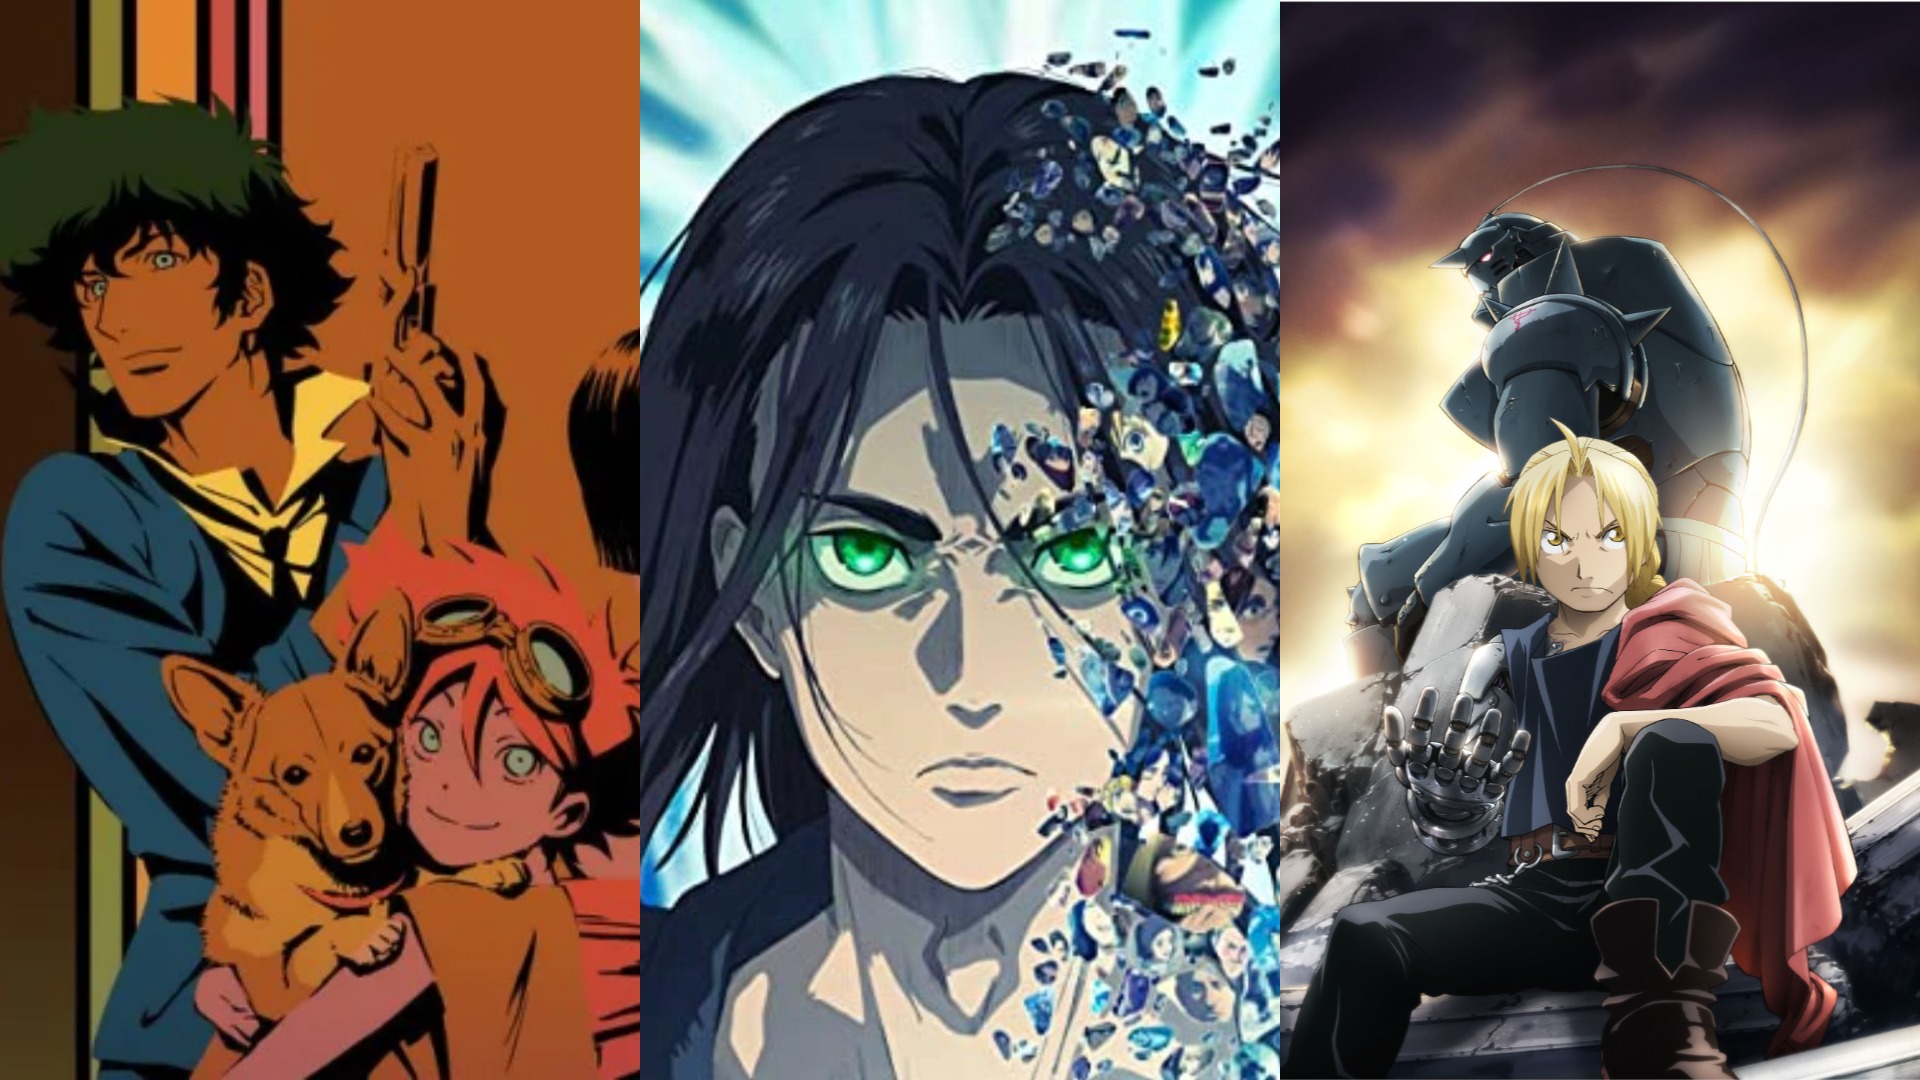 A Web-Based Analysis of the Top 100 Action Anime TV Shows